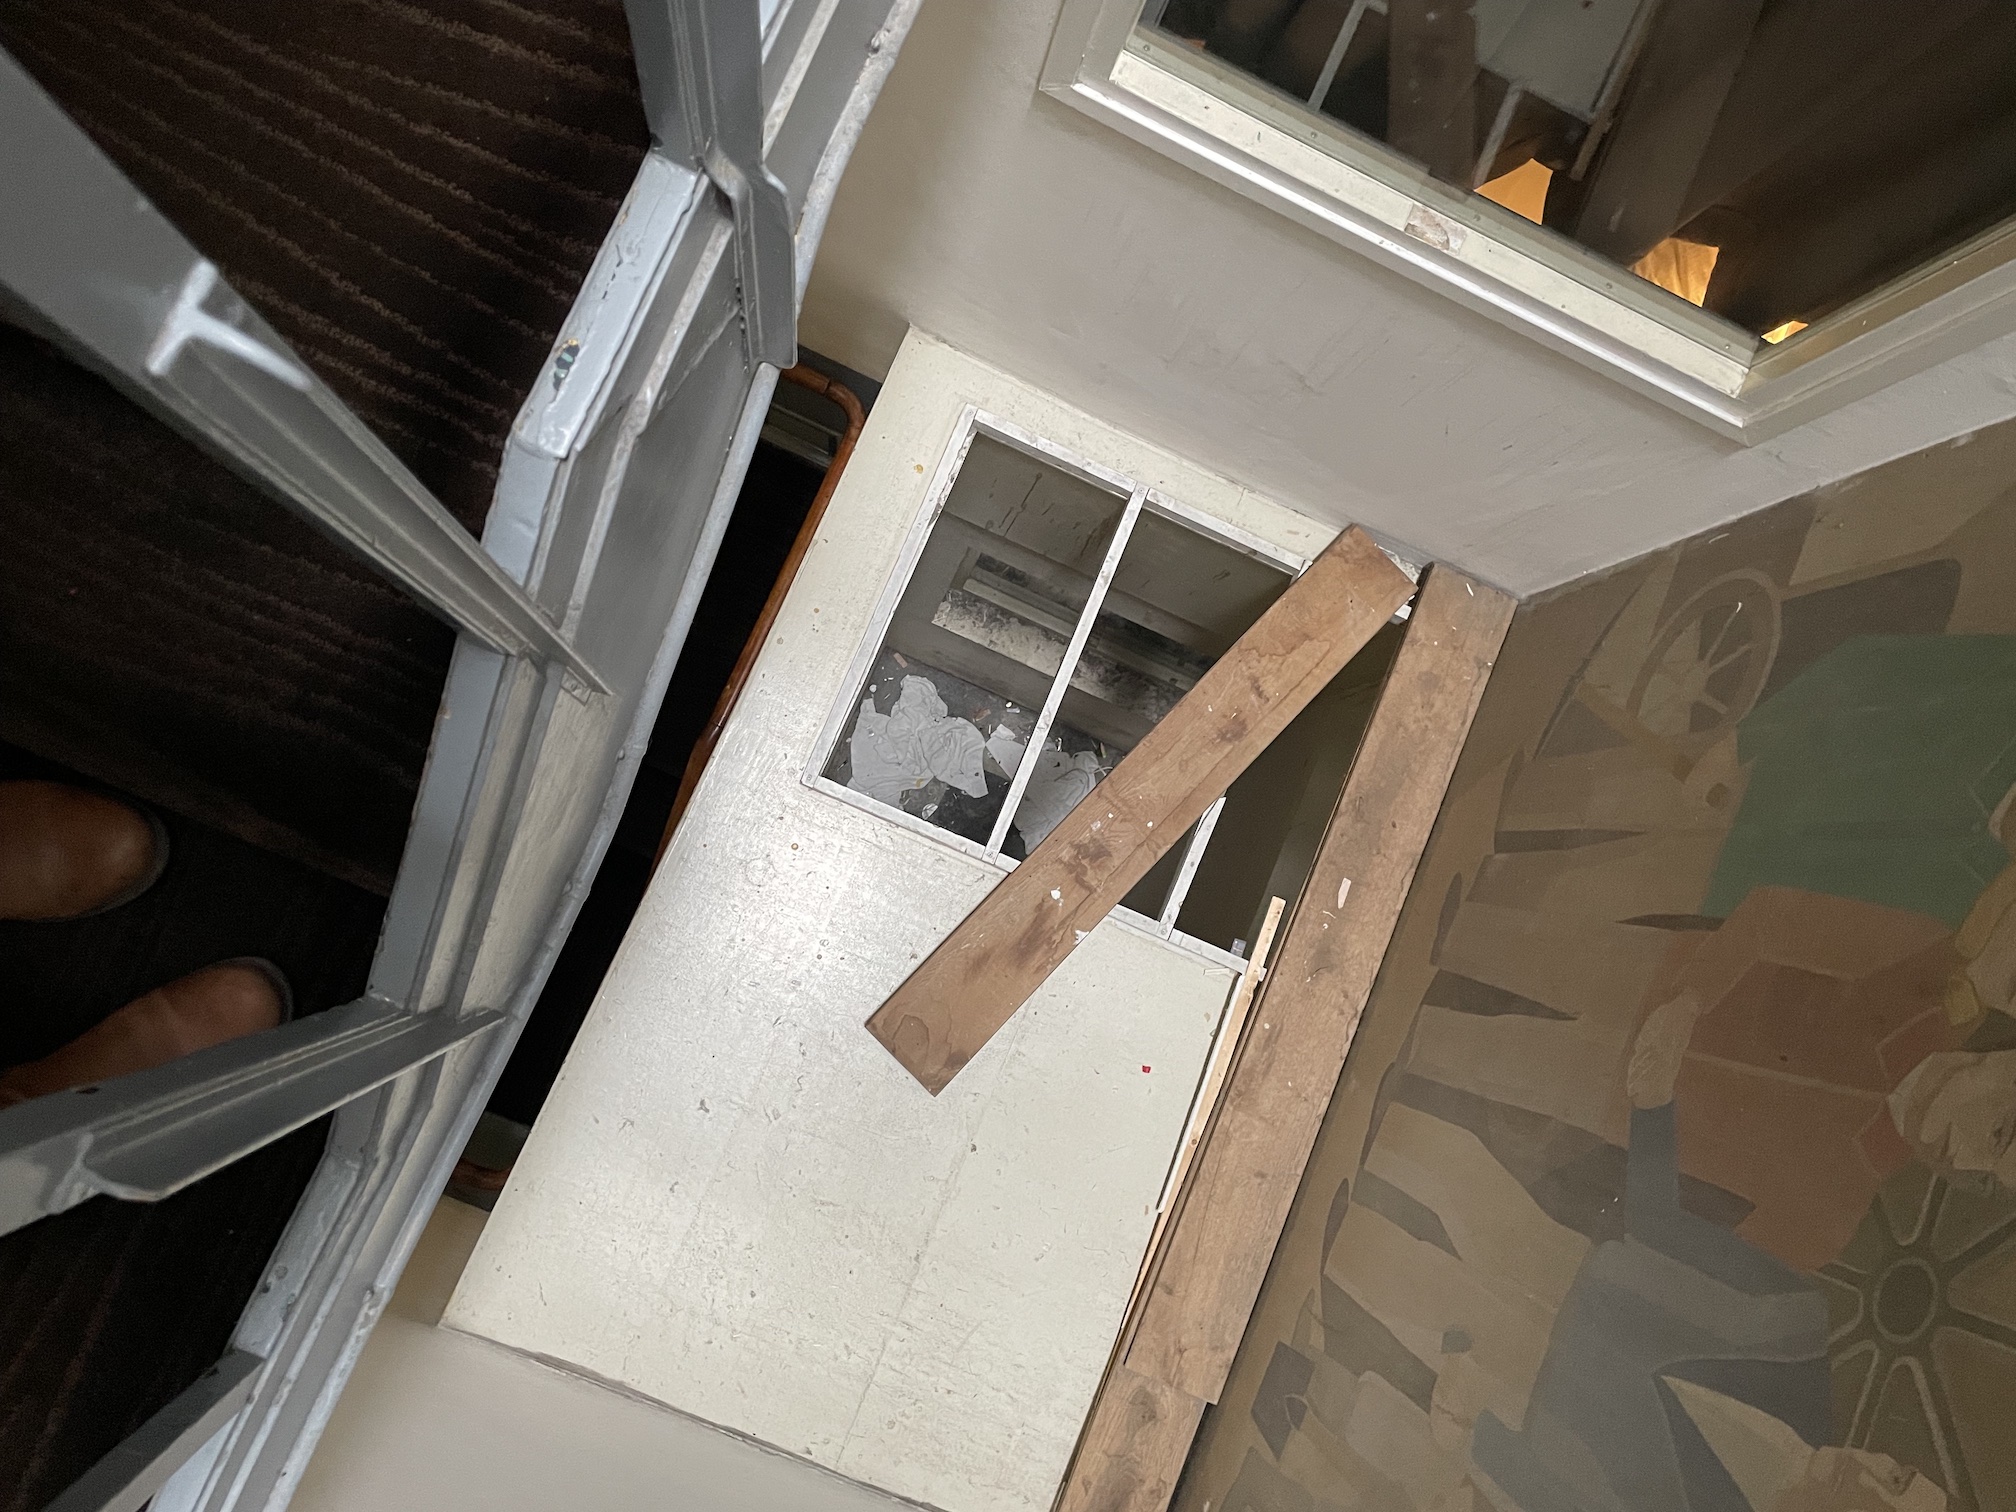 A view looking down a stairwell at some loose boards and sketchy woodwork in an Amsterdam hotel